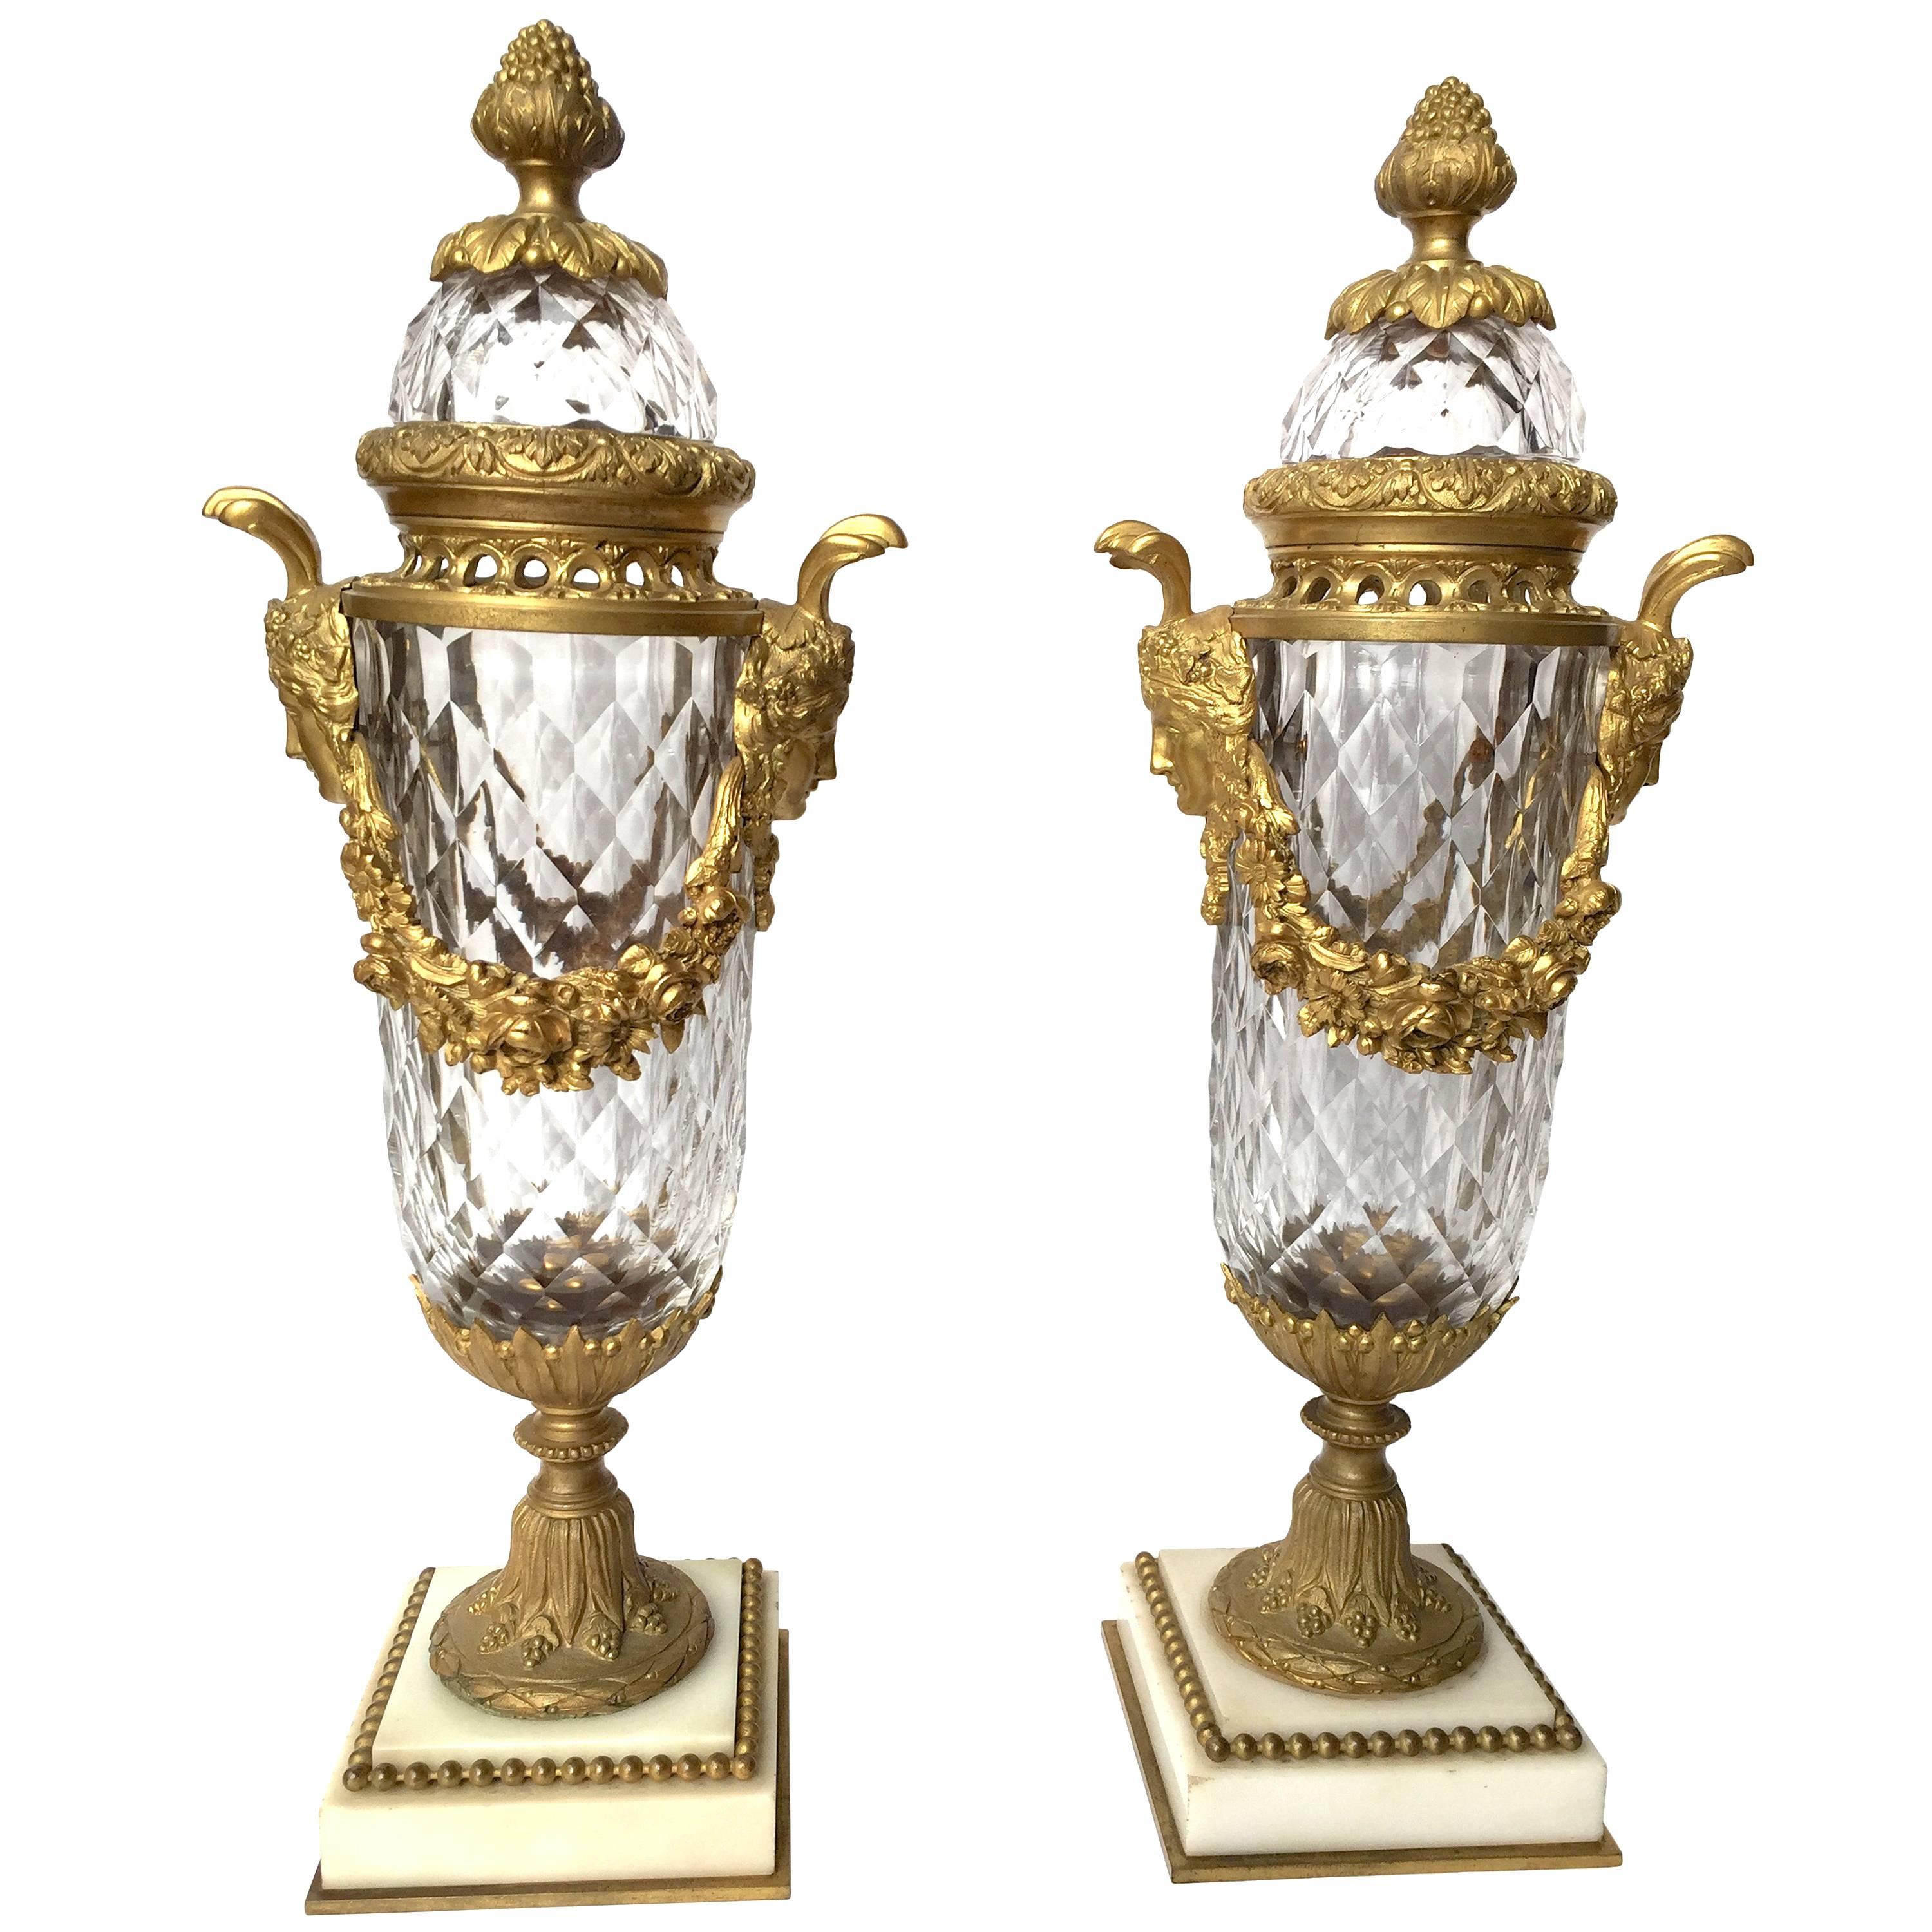  Baccarat Attribution Cut Crystal and Gilt Bronze Mounted Urns Circa 1890 For Sale